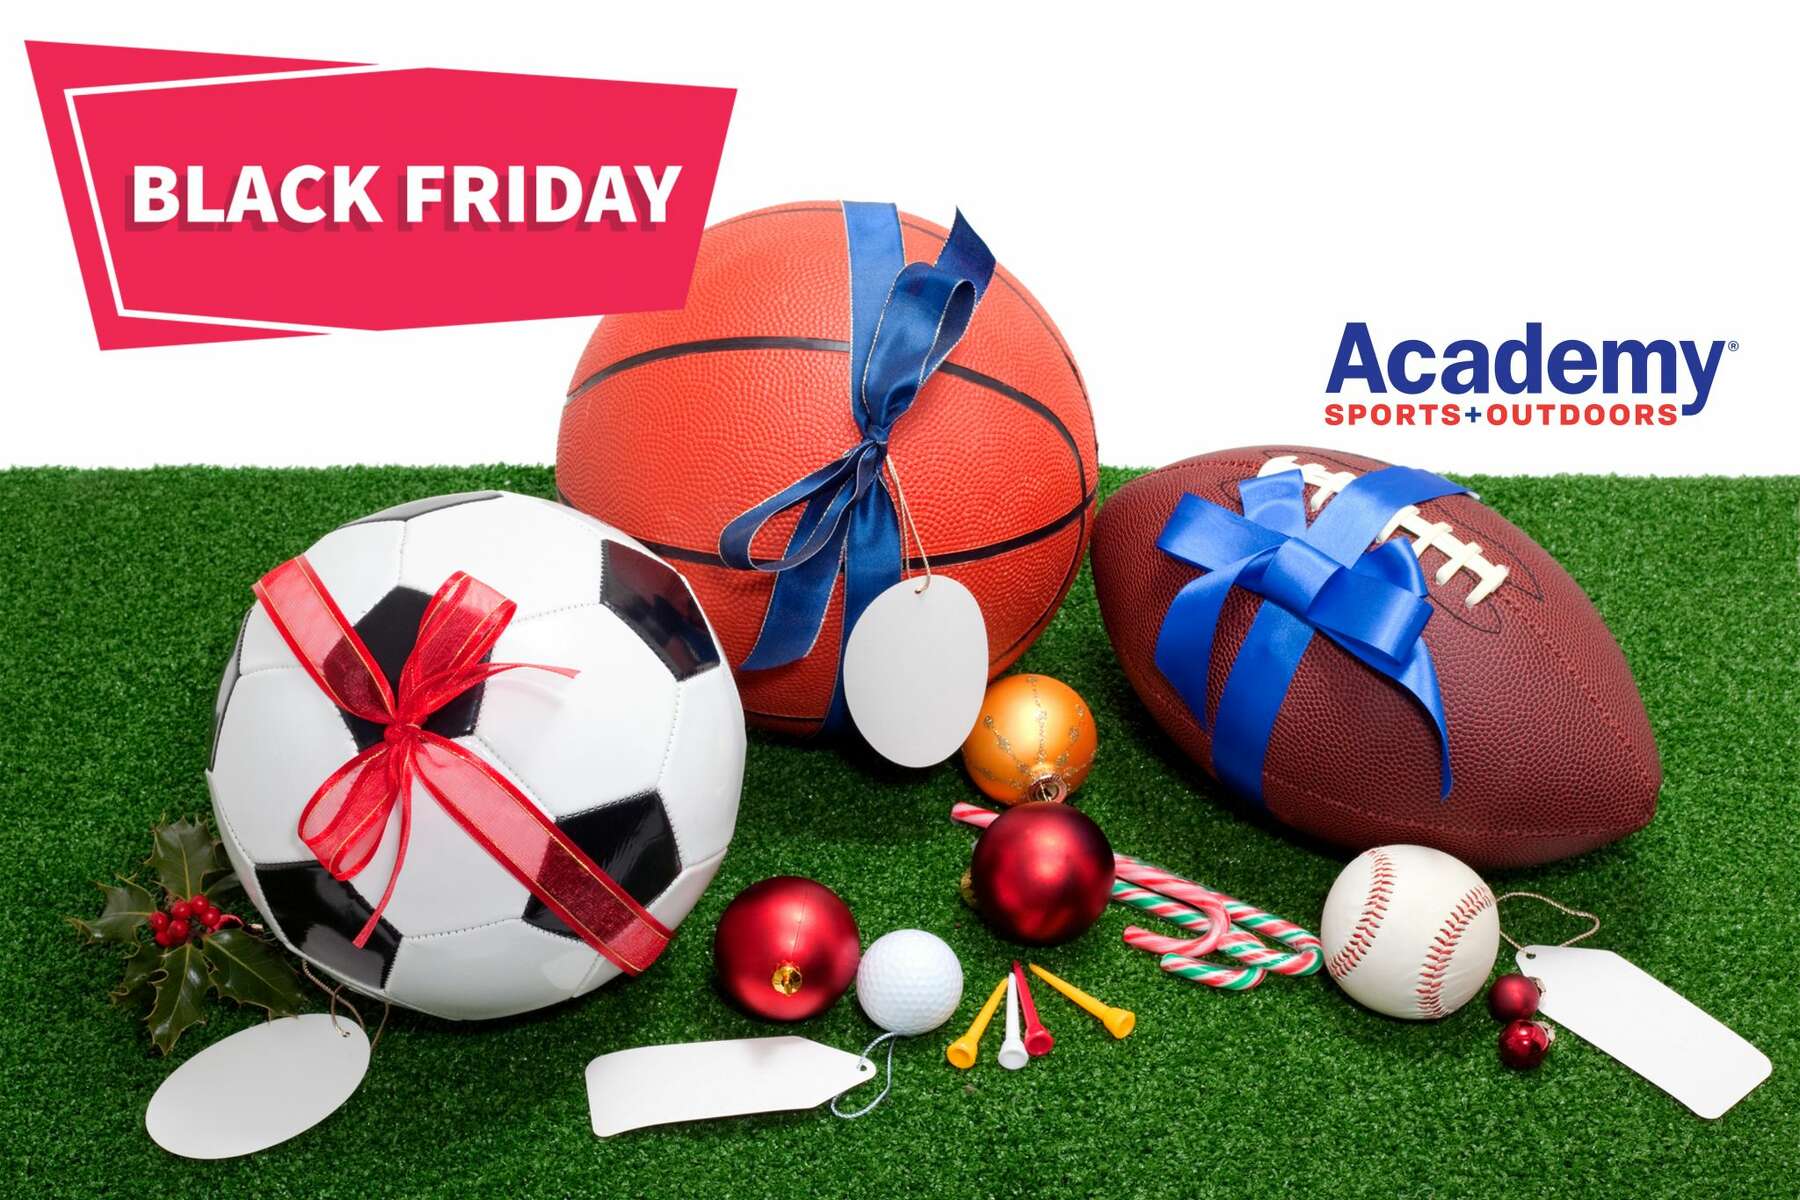 Gear up for Black Friday at Academy Sports and Outdoors